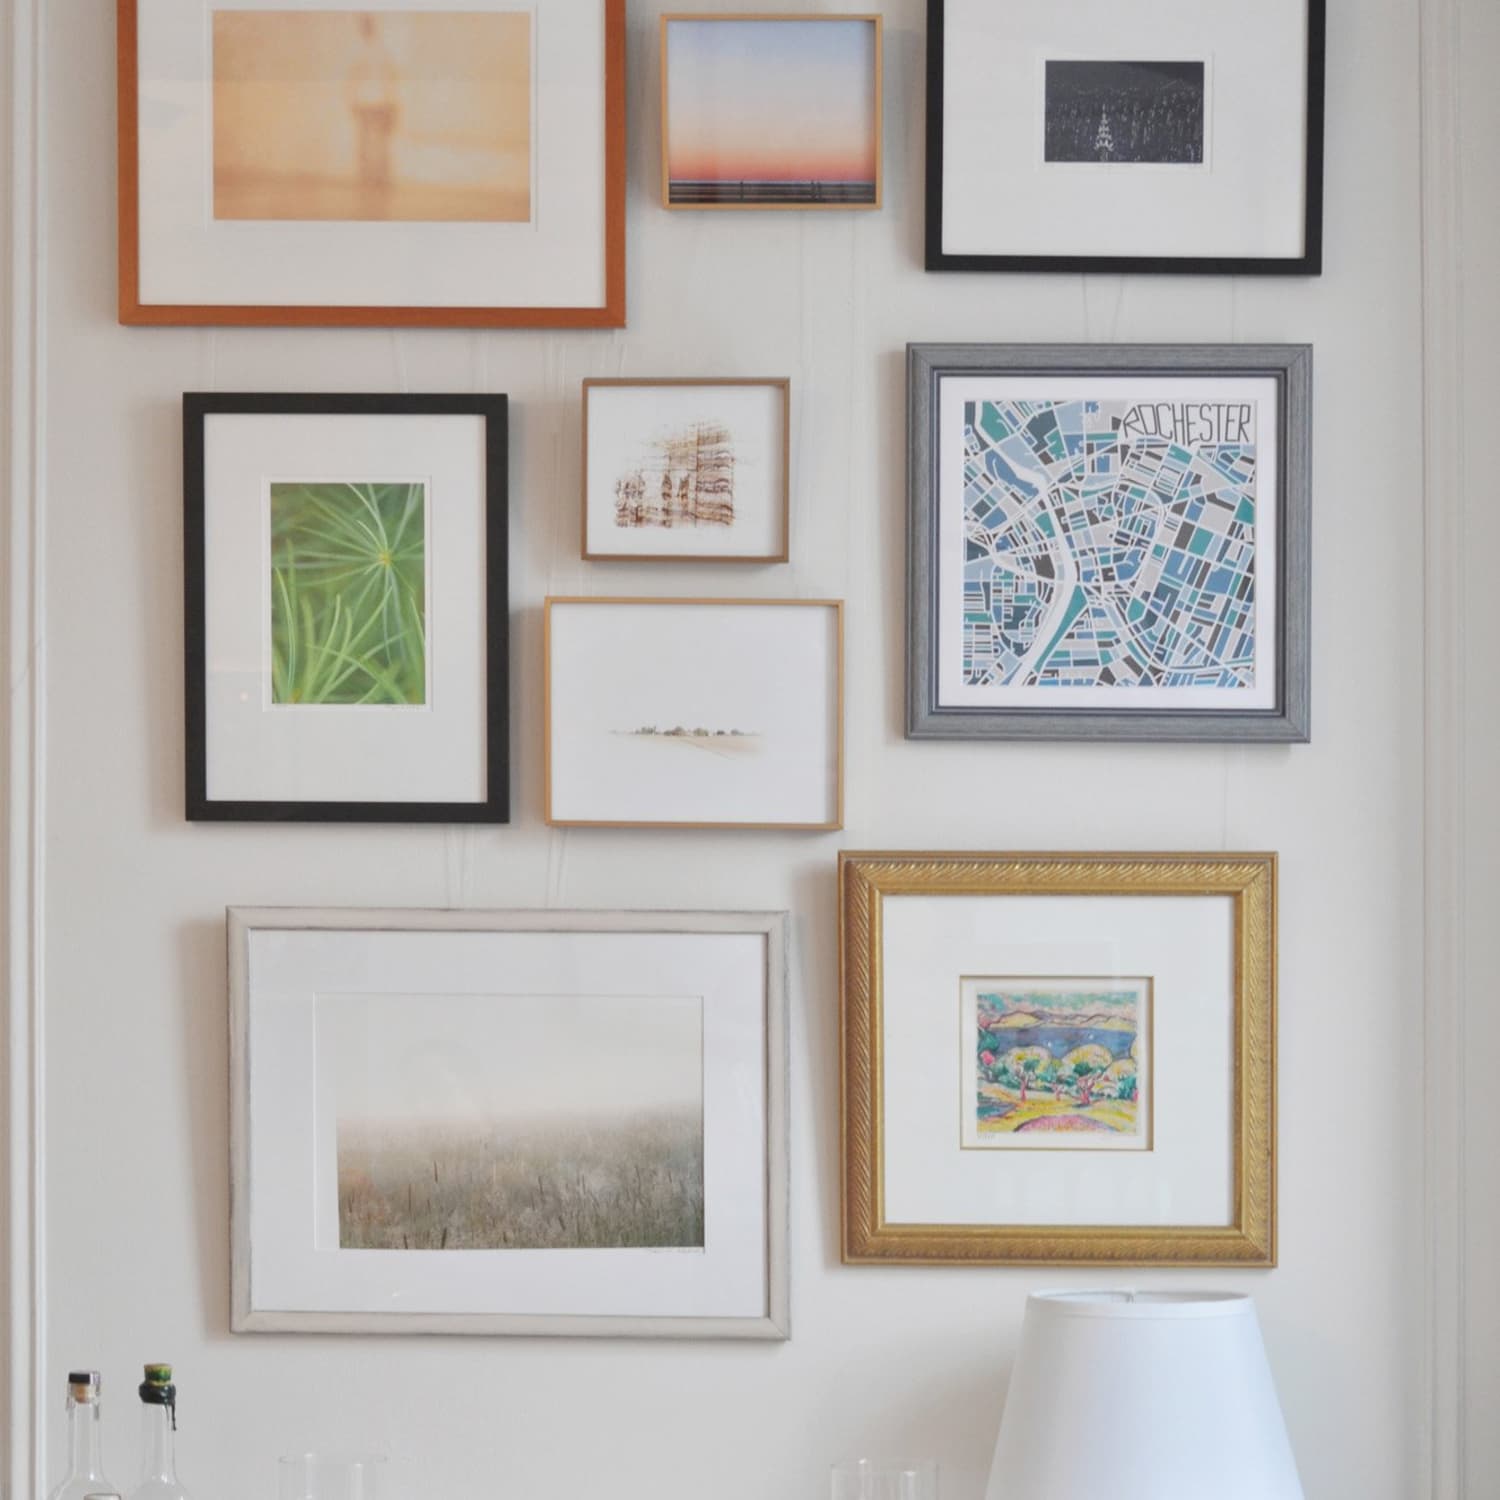 How To Frame Small Art (Art Smaller Than 5 X 5)